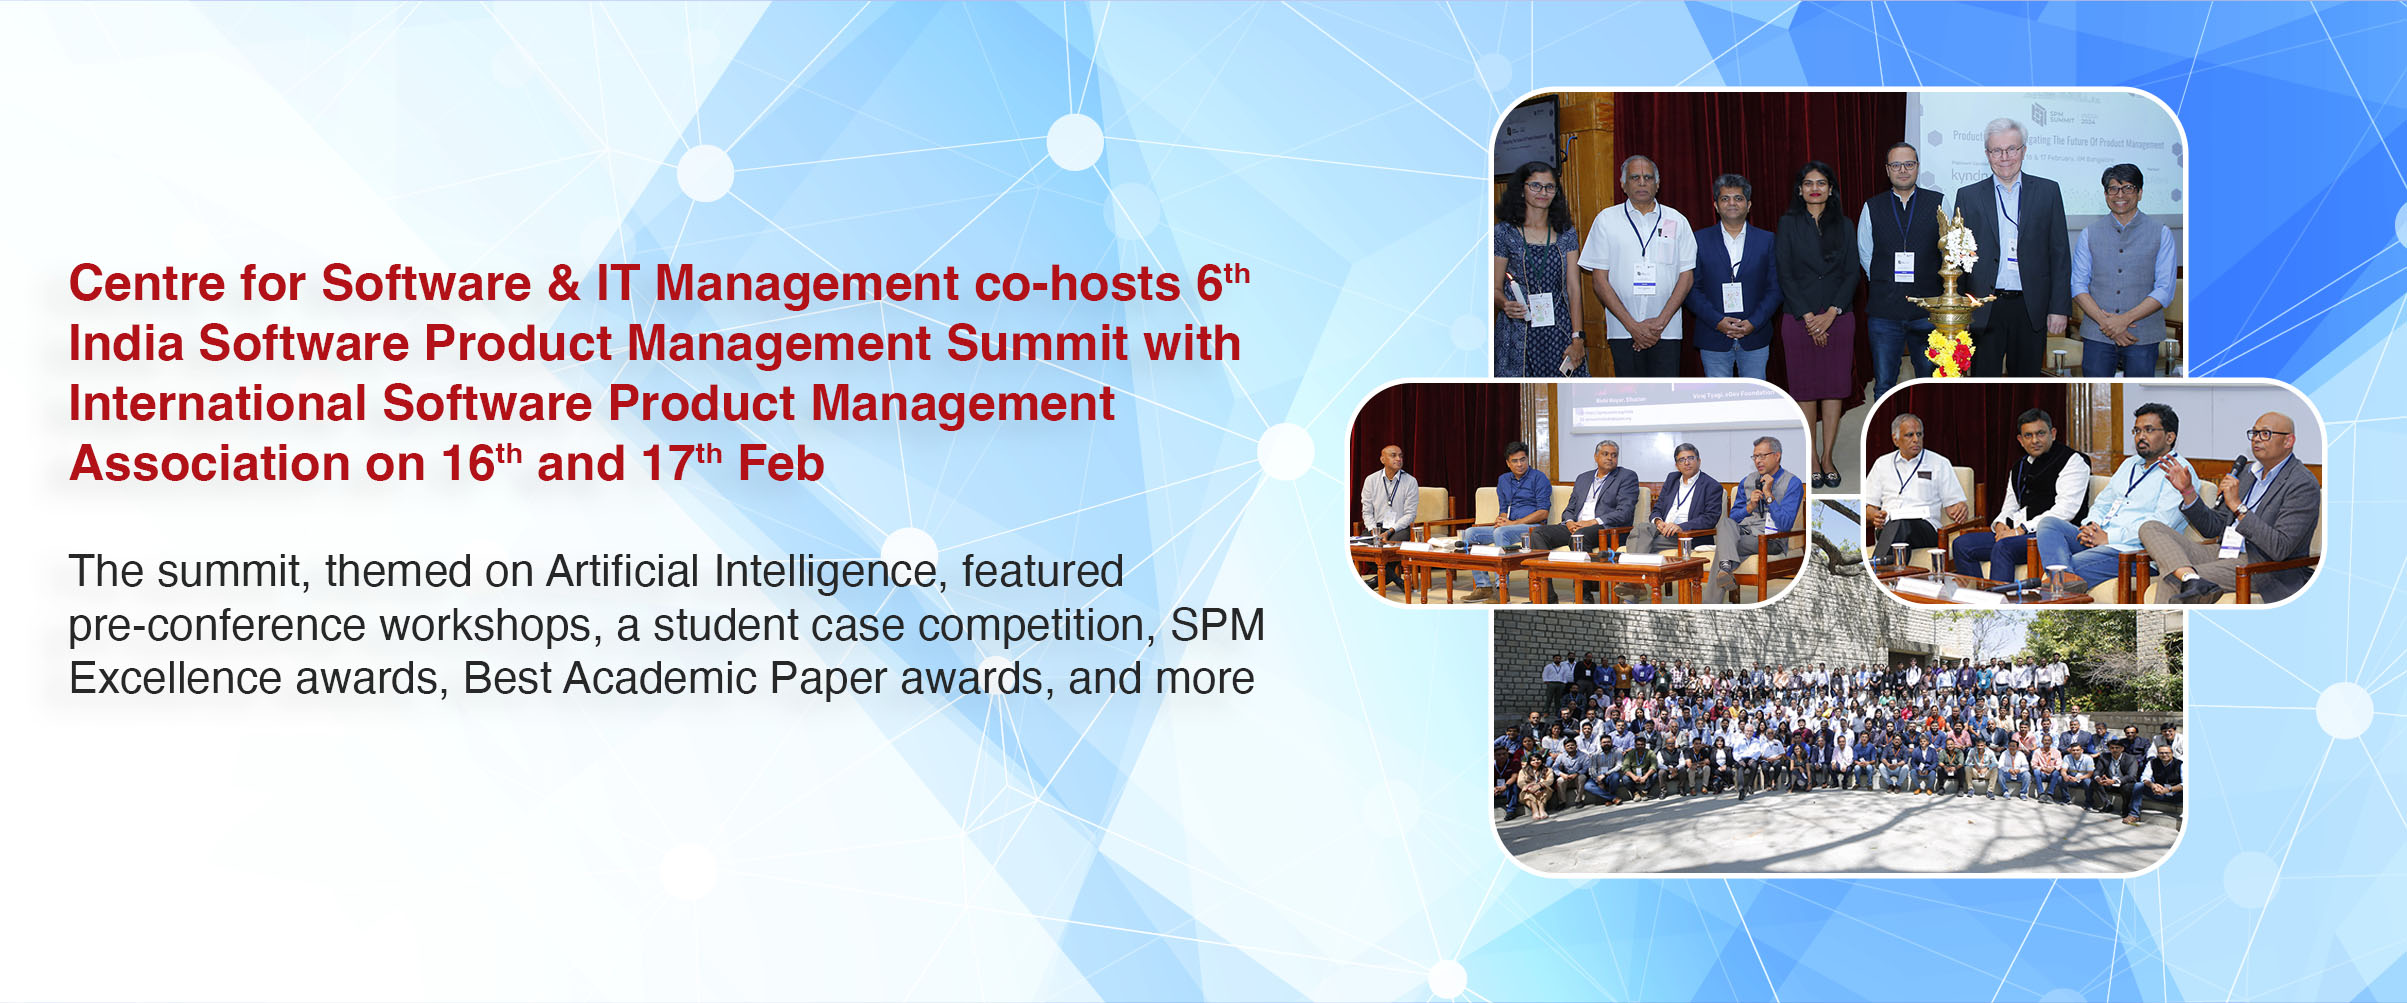 6th India Software Product Management Summit